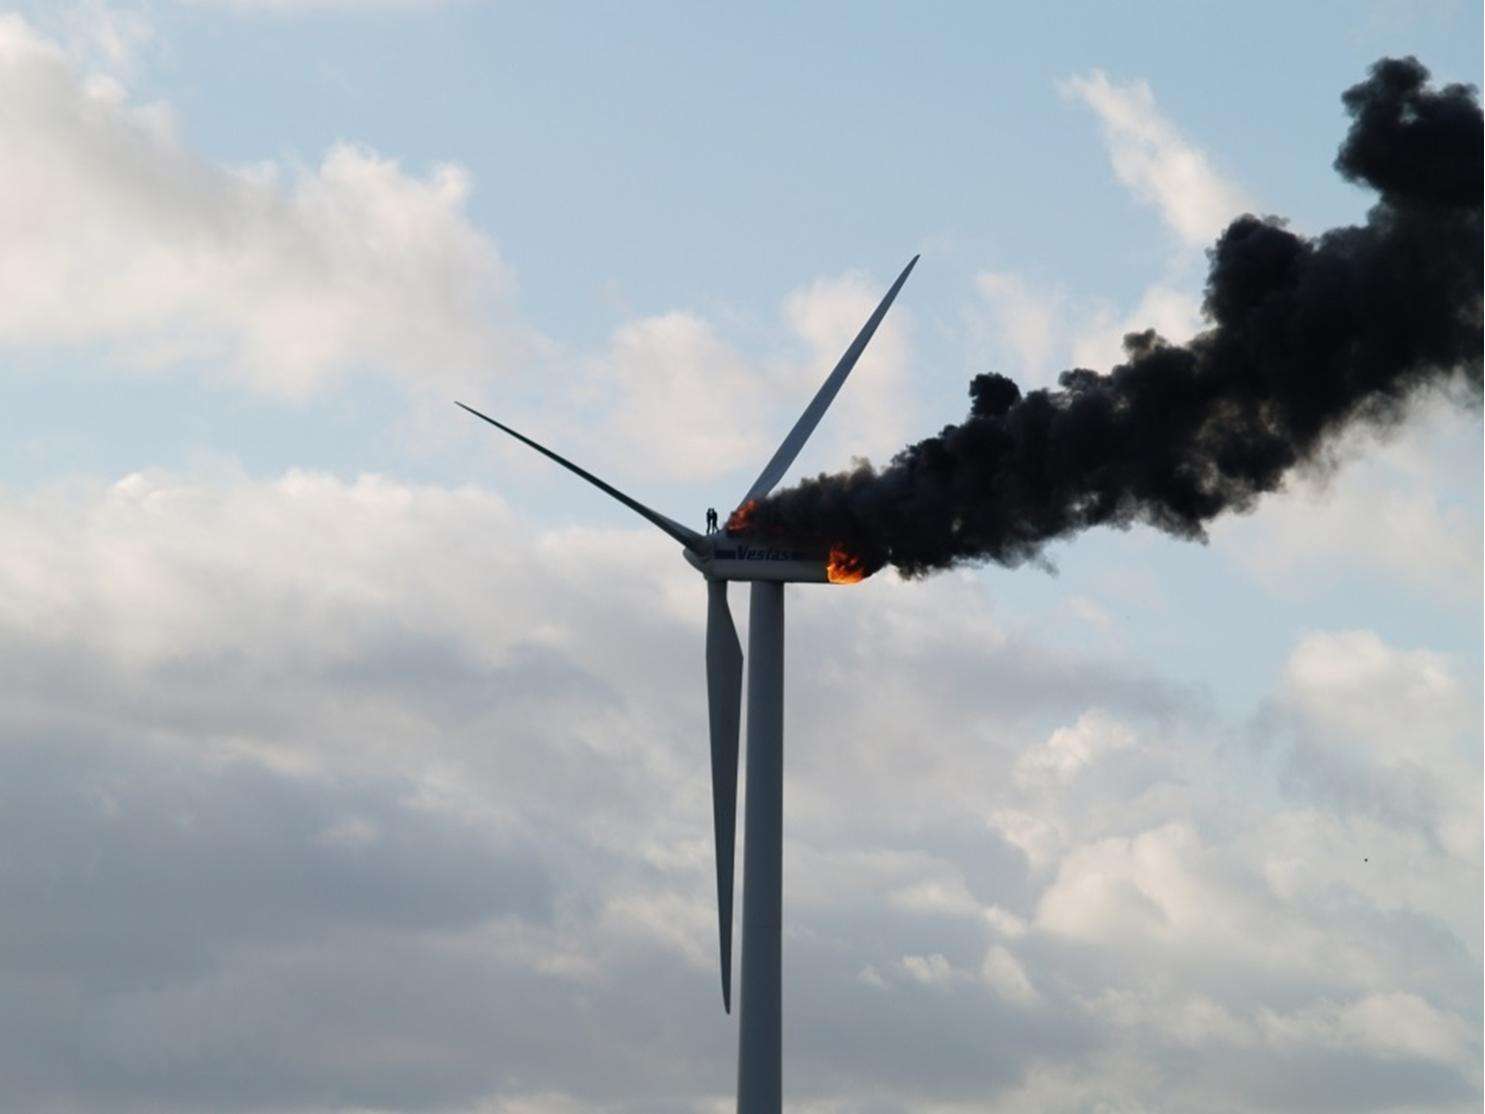 Two engineers died when the windmill they were working on caught fire. This happened on 29 of October in the Netherlands, "in Ooltgensplaat to be more precise". A crew of four was conducting routine maintenance to the 67 meter high turbine. They were in a gondola next to the turbine when a fire broke out. The fire quickly engulfed the only escape route the stairs in the shaft, trapping two of the maintenance crew on top of the turbine. One of them jumped down and was found in a field next to the turbine. The other victim was found by a special firefighter team that ascended the turbine when the fire died down a bit. The cause of the fire is unknown, but is believed to be a short circuit. Firefighters are fairly powerless to do anything to fight fires on wind turbines, and due to high costs maintenance crews have limited means and training to escape an emergency situation.